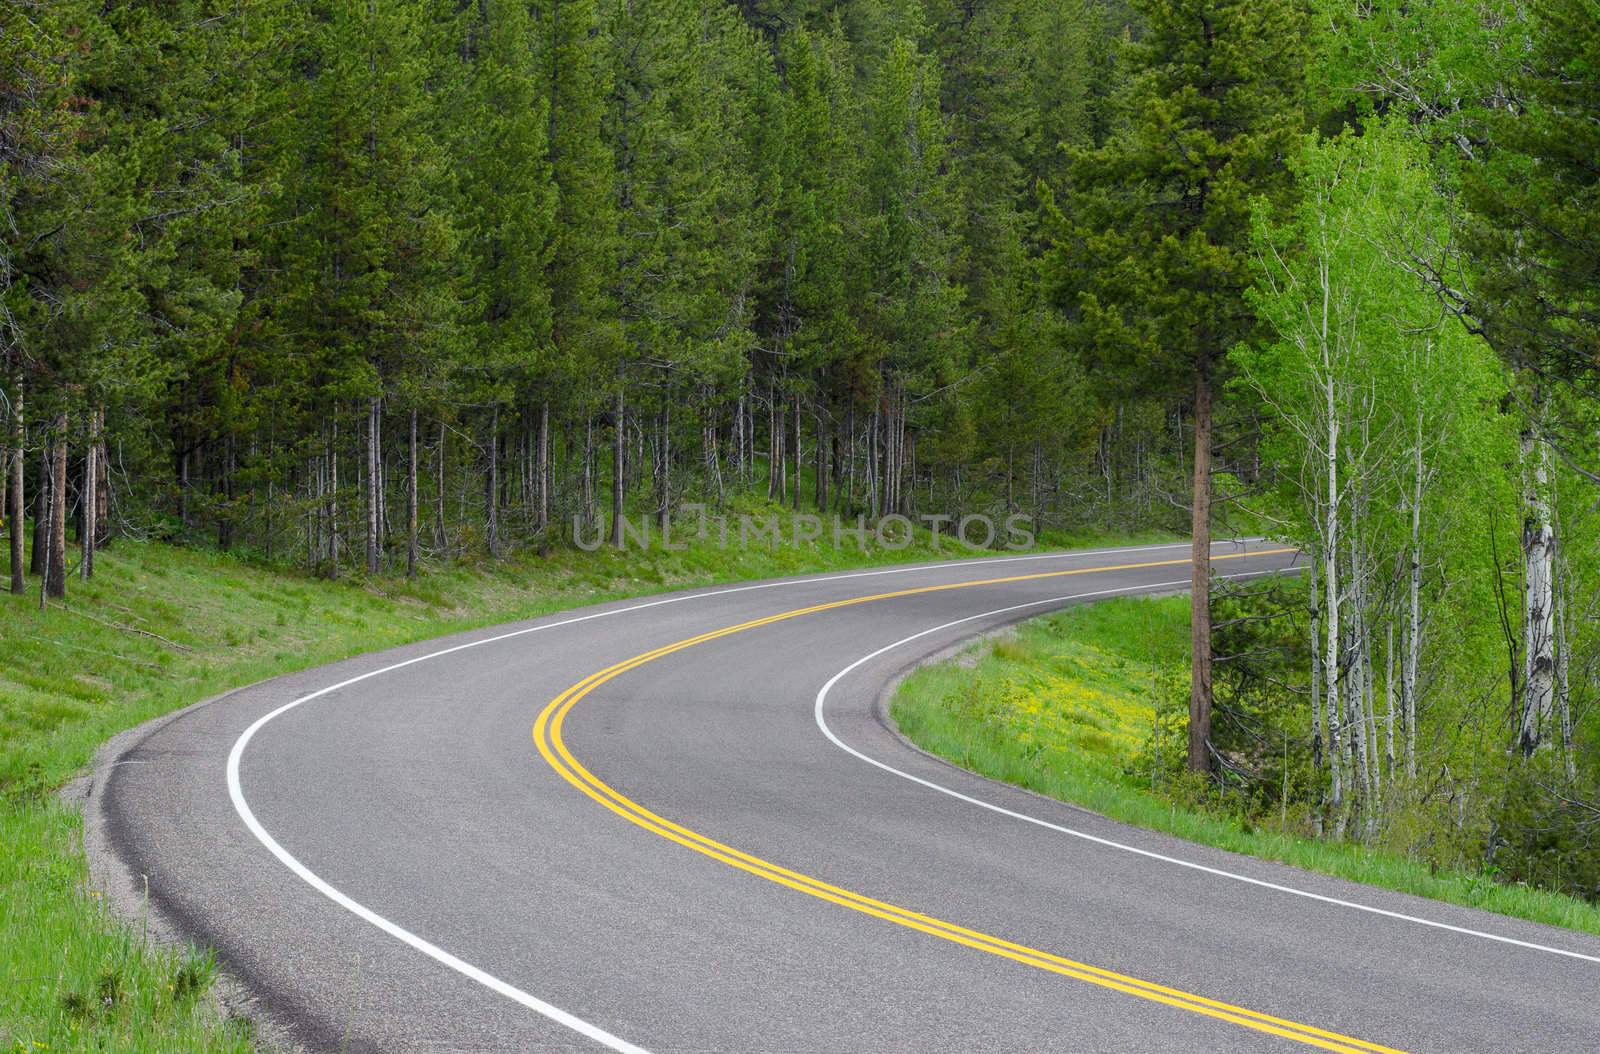 Scenic US Highway 191 and Lodgepole Pine forest, Grand Teton National Park, Teton County, Wyoming, USA